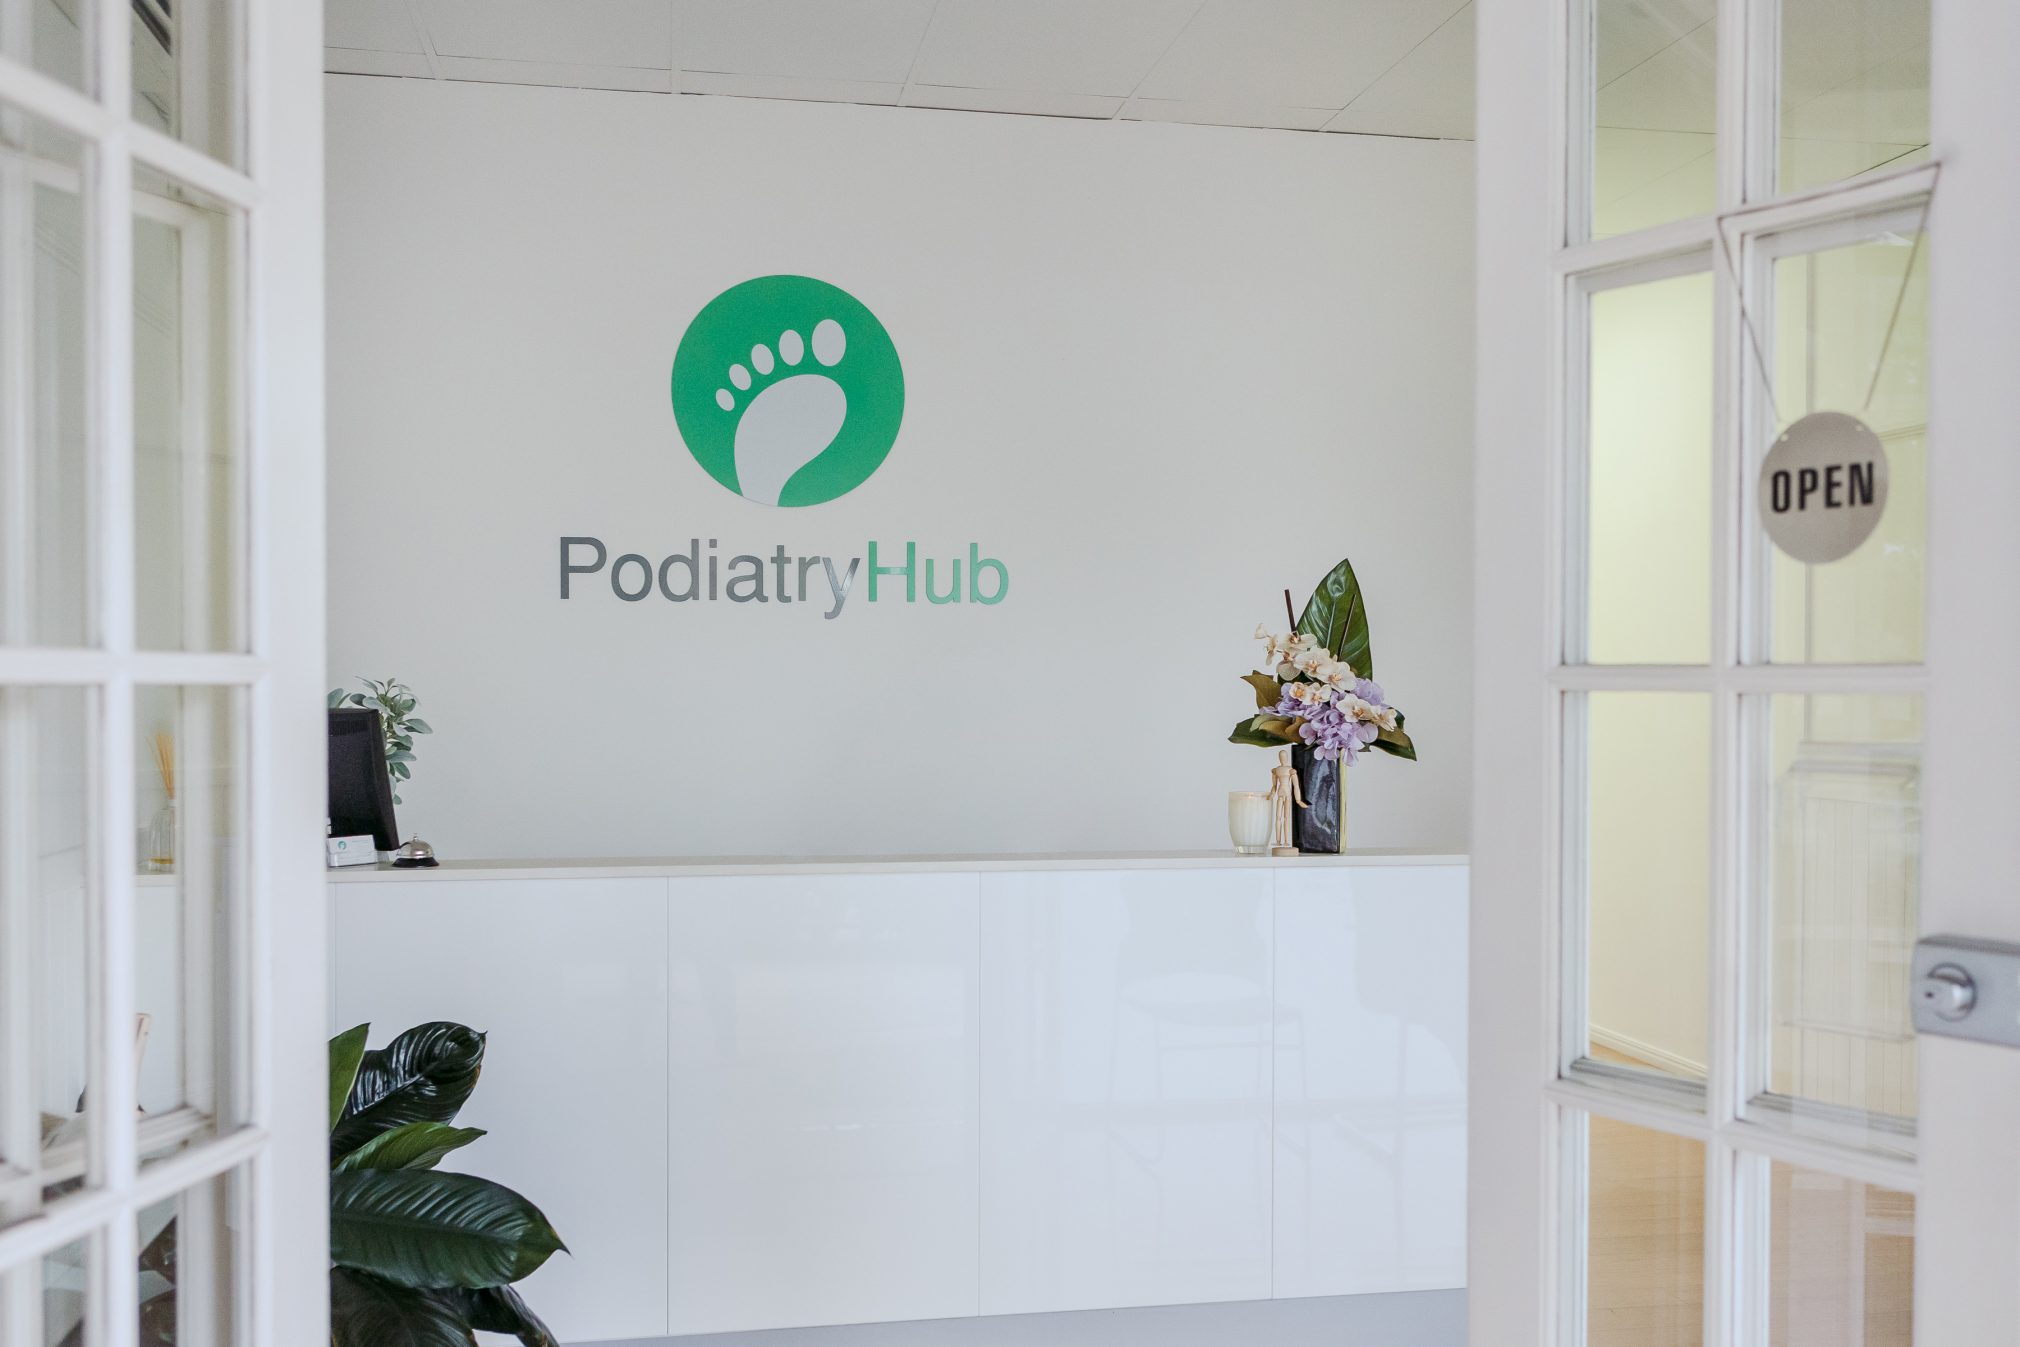 Podiatry hub clinic reception desk with their logo on the back wall